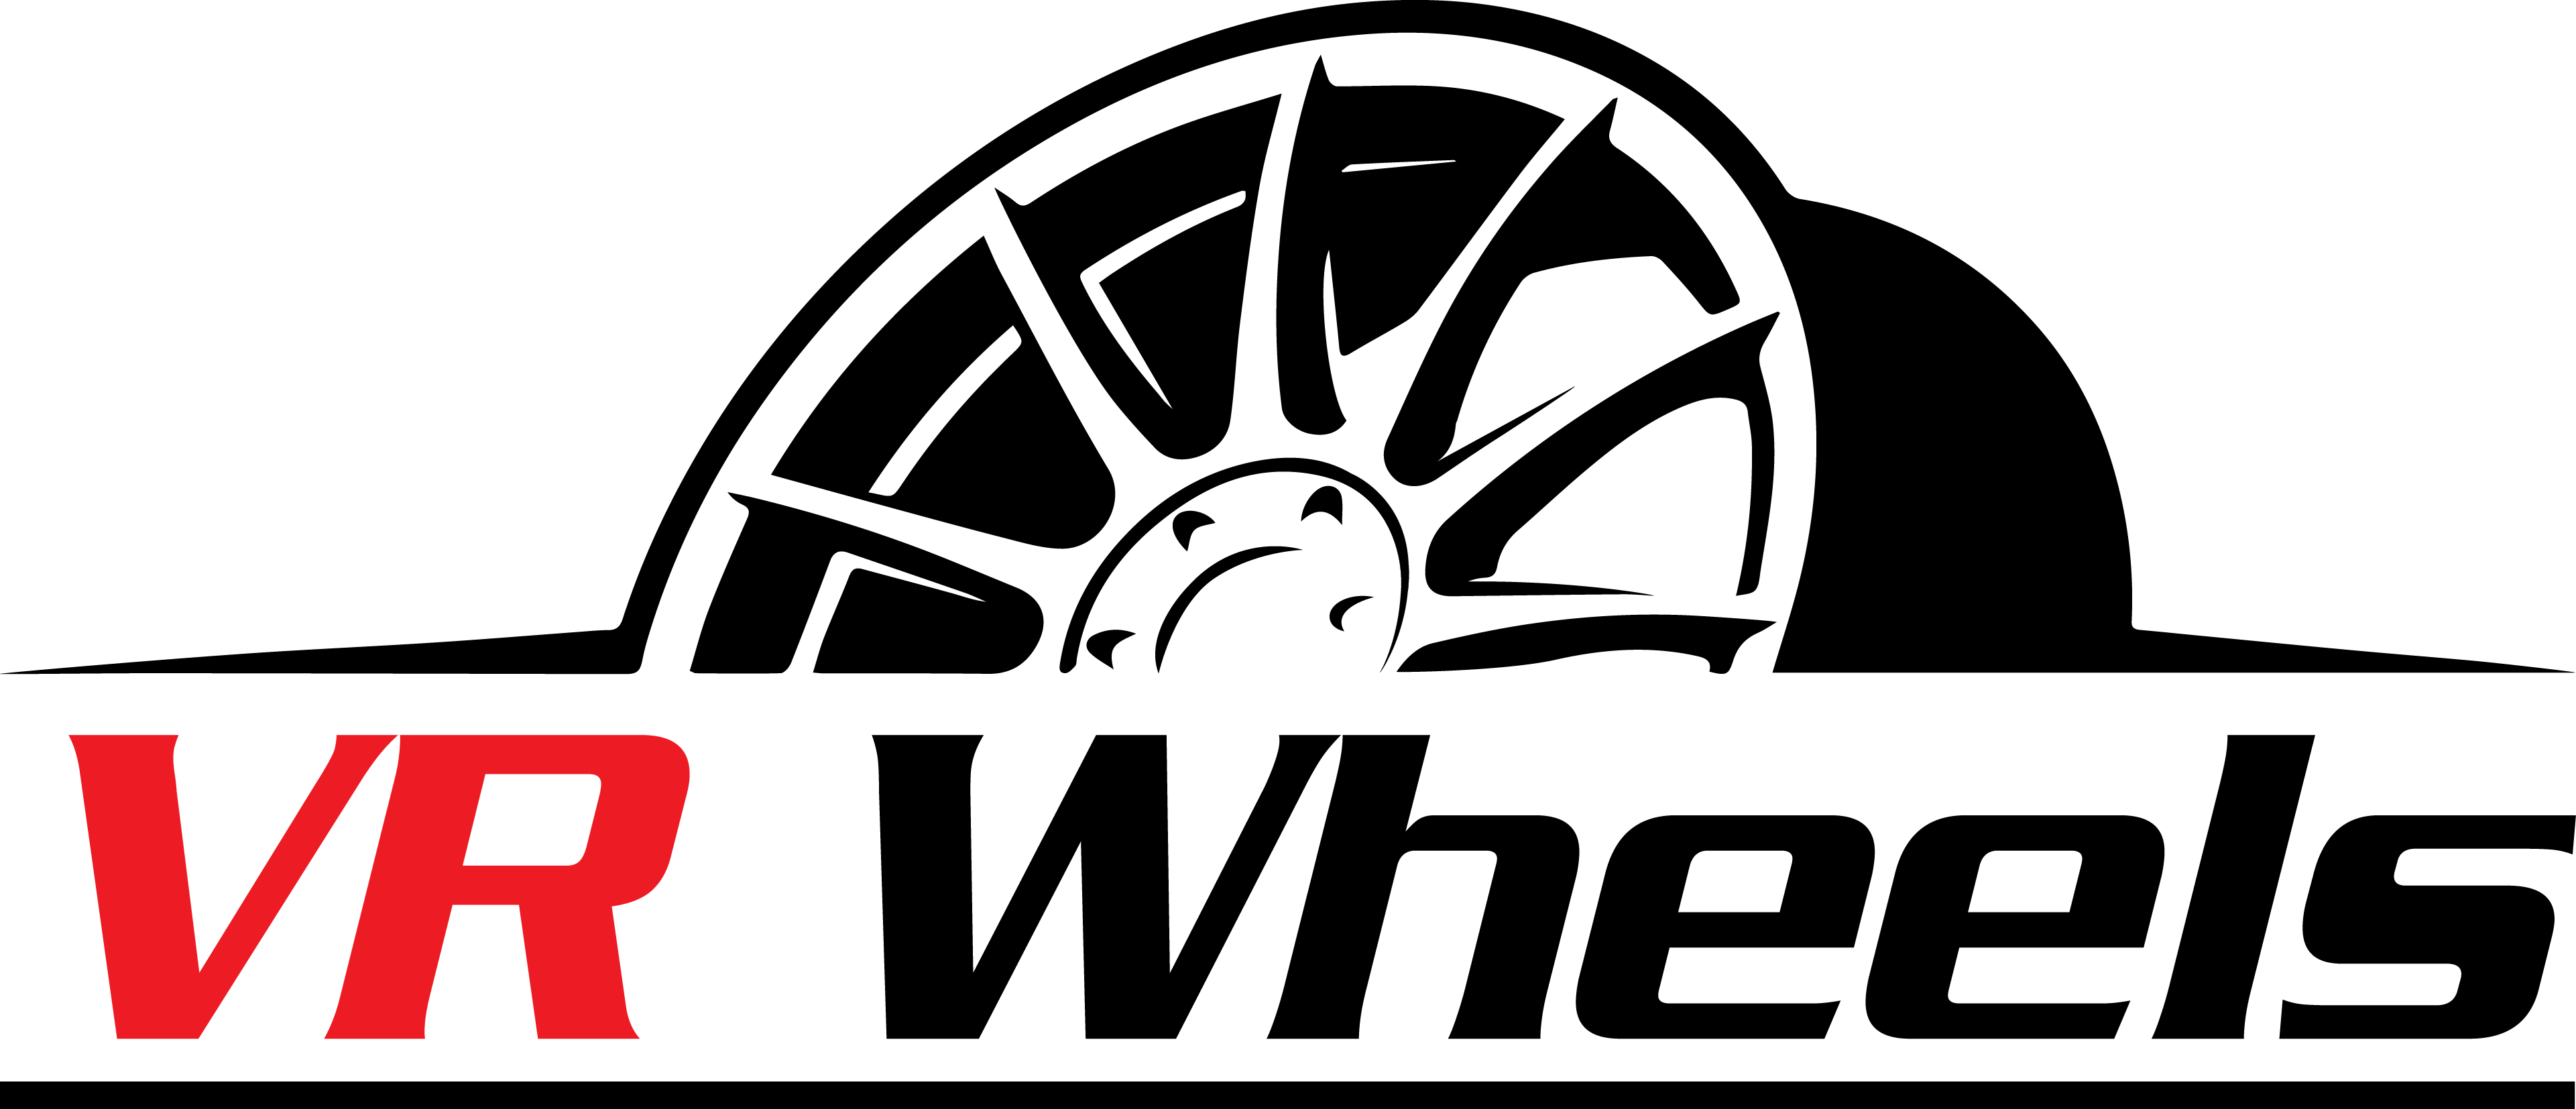 Rim Logo - VR Wheels: Home of the Three-piece Wheel Industry Specialists